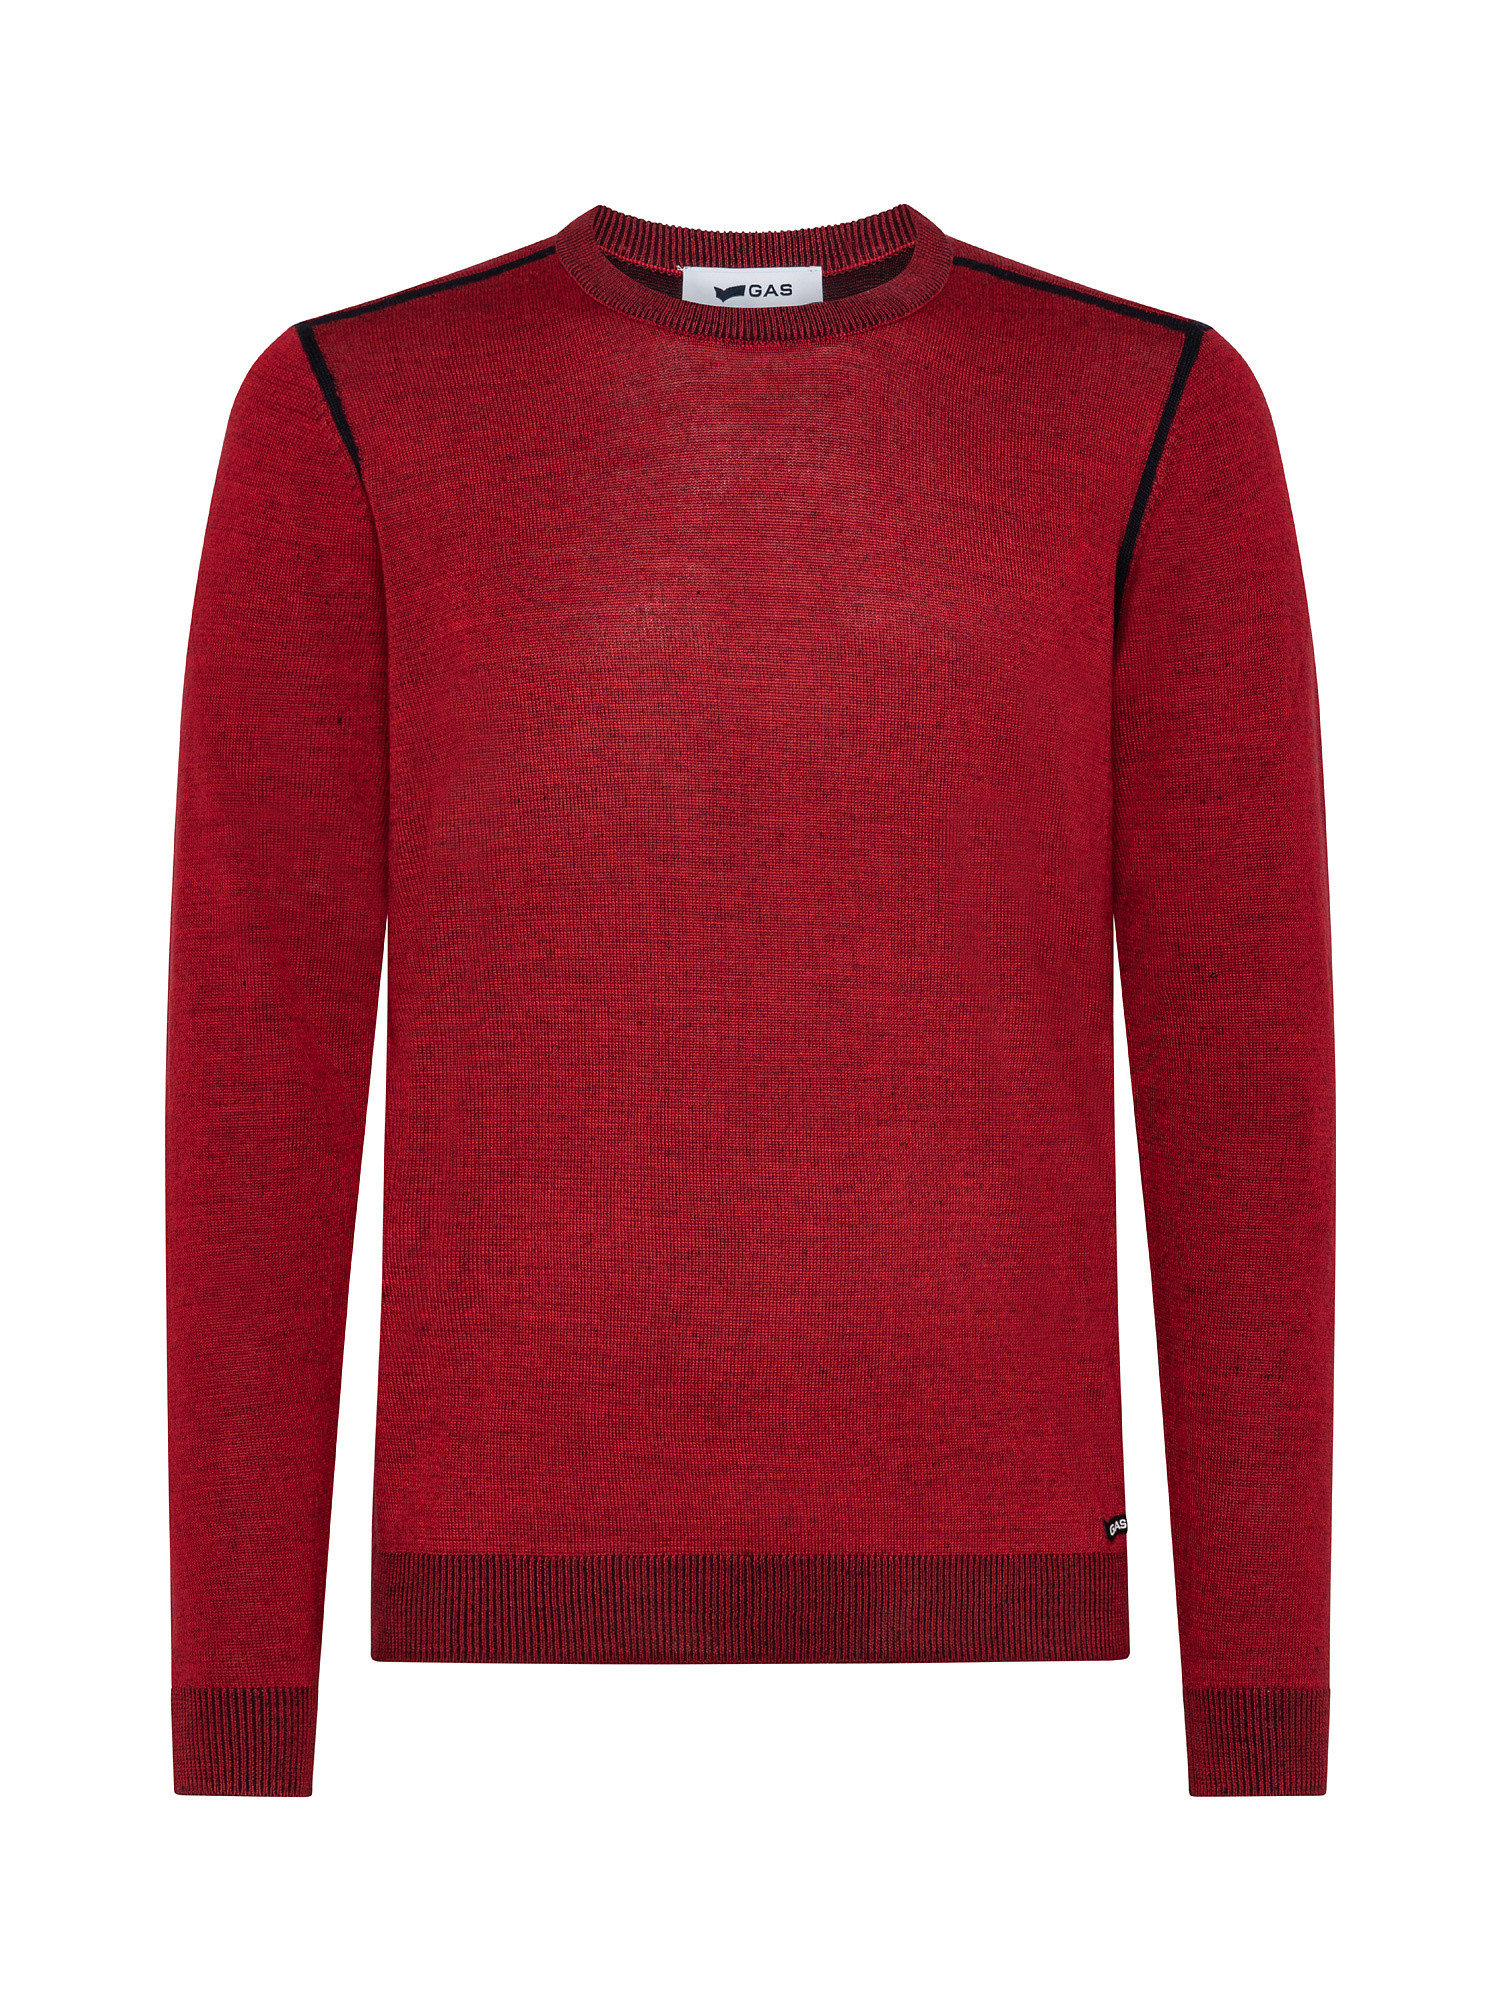 Wool blend crewneck sweater, Red, large image number 0